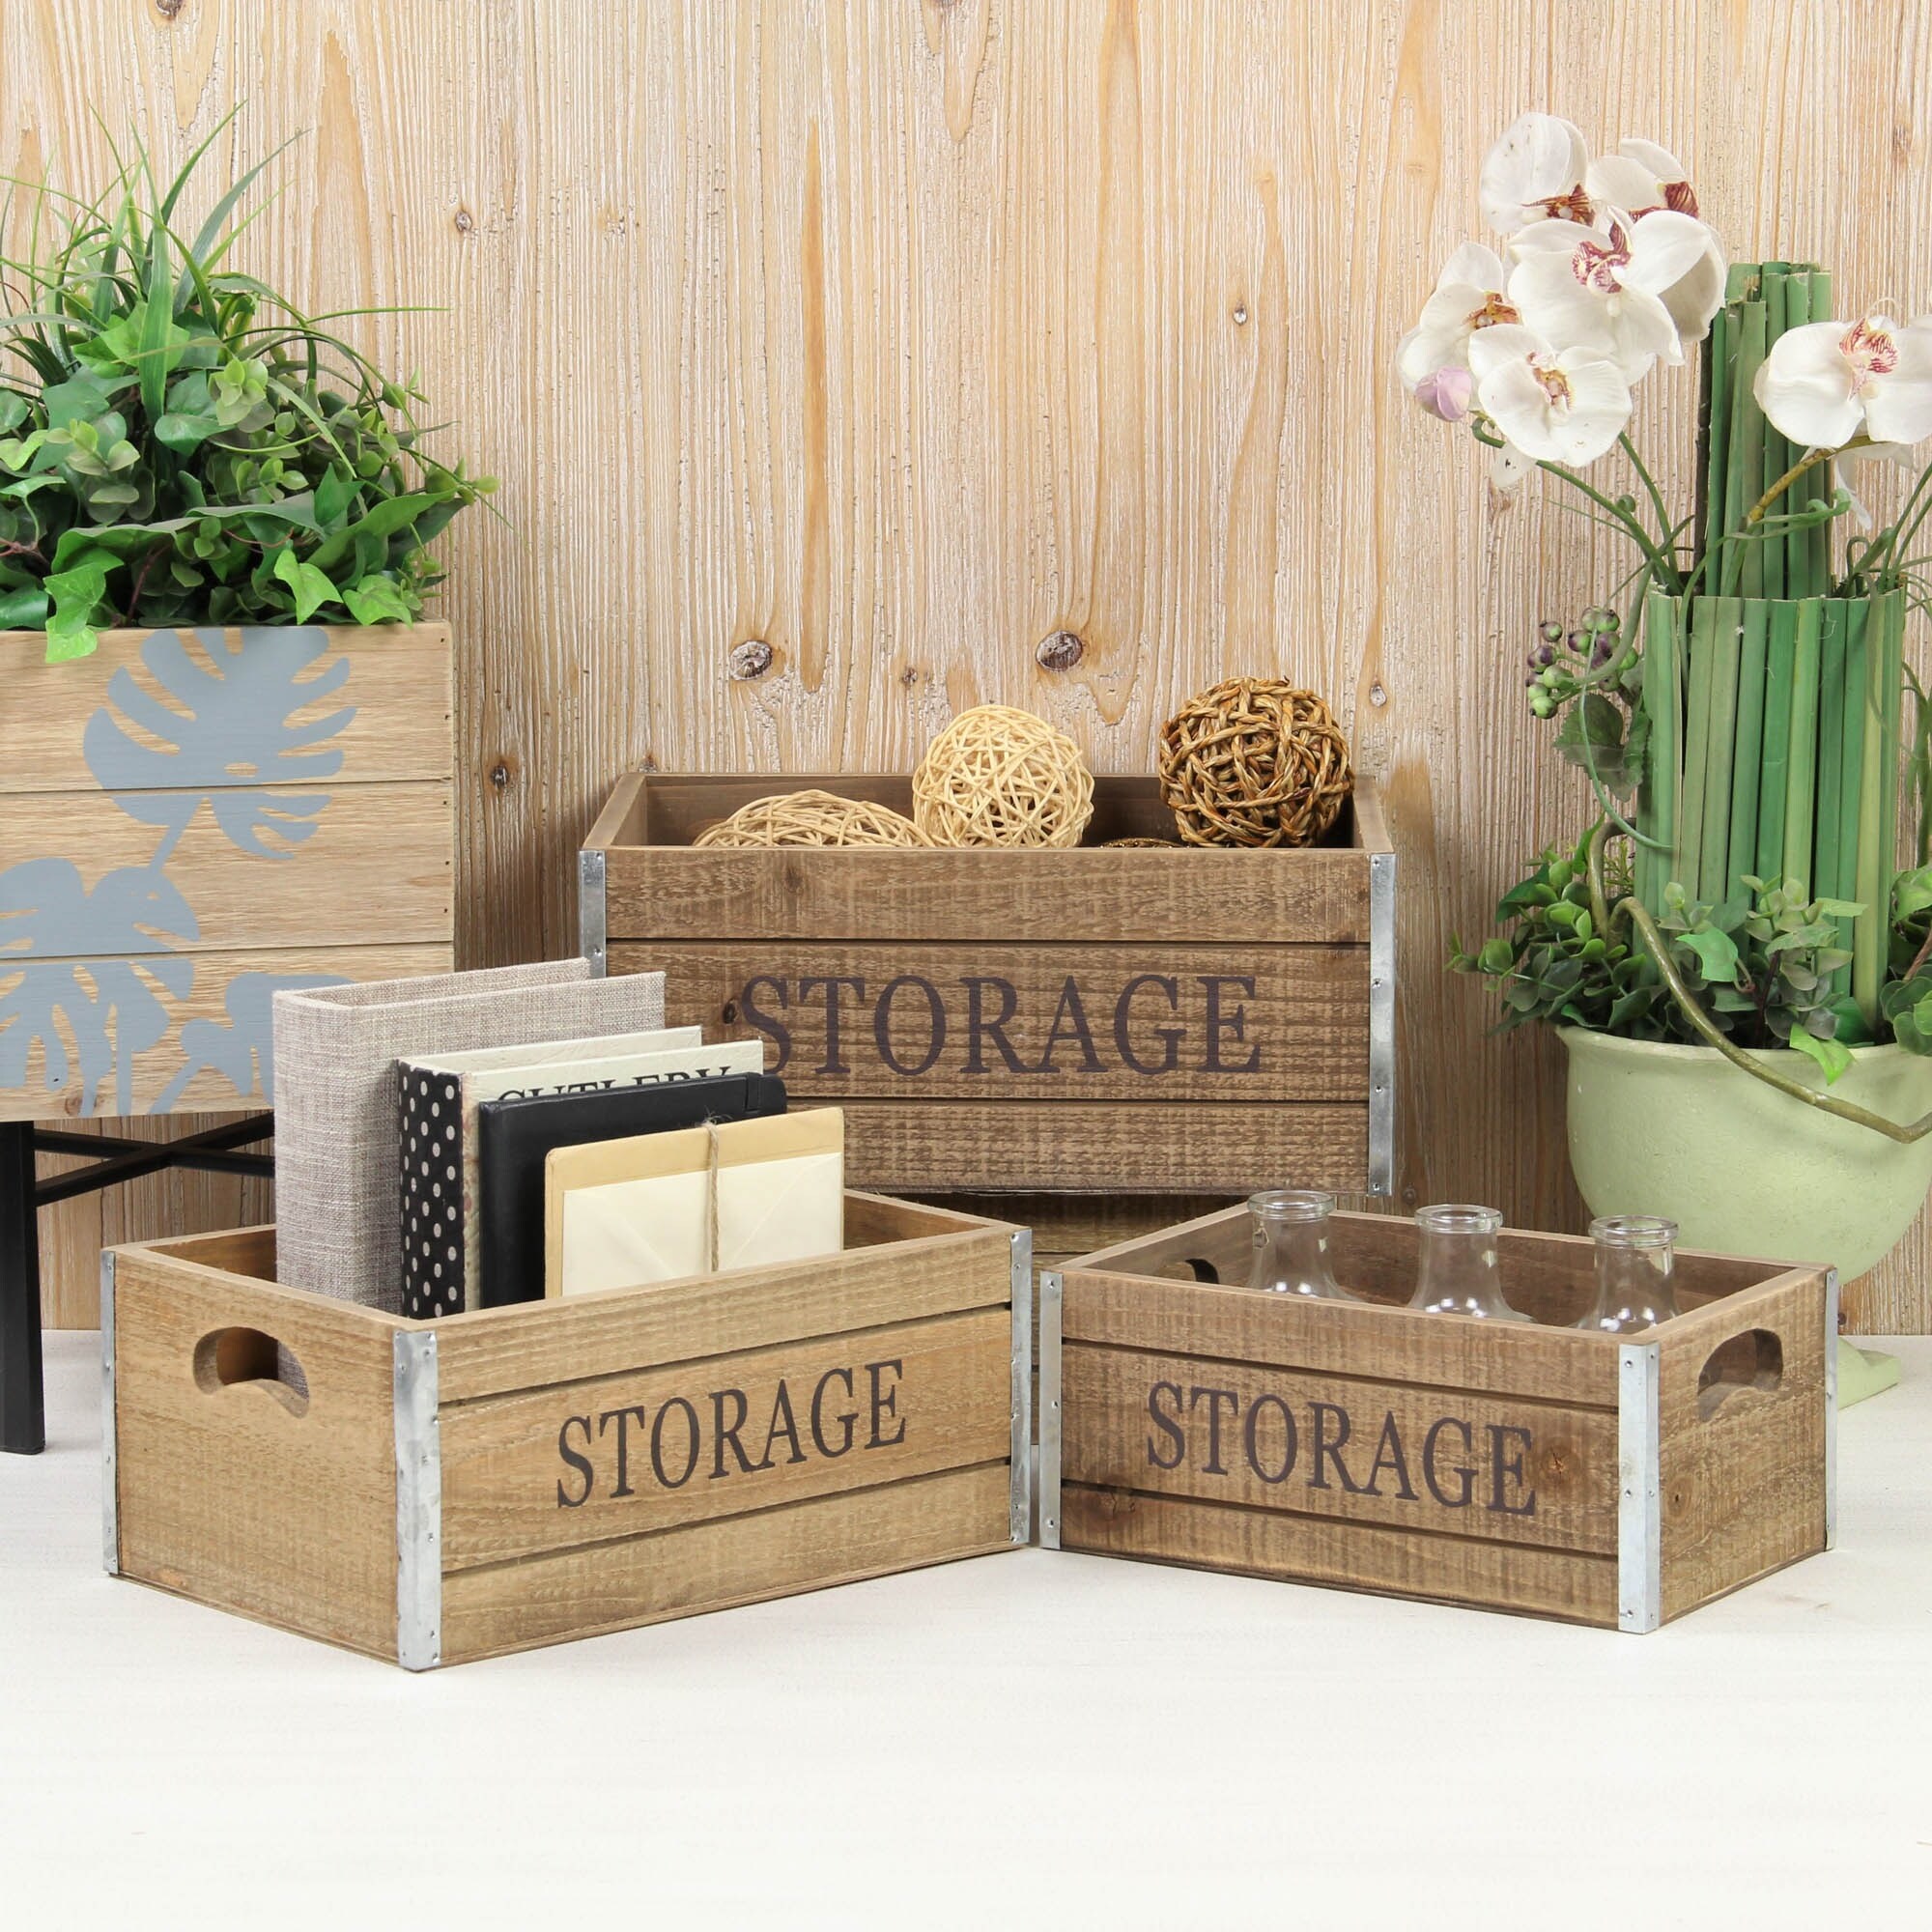 Vintage Wood Crates for Storage with Metal Trims (Set of 3, Light Green):  Versatile Wooden Storage Boxes with Handles, Farmhouse Wooden Crates for